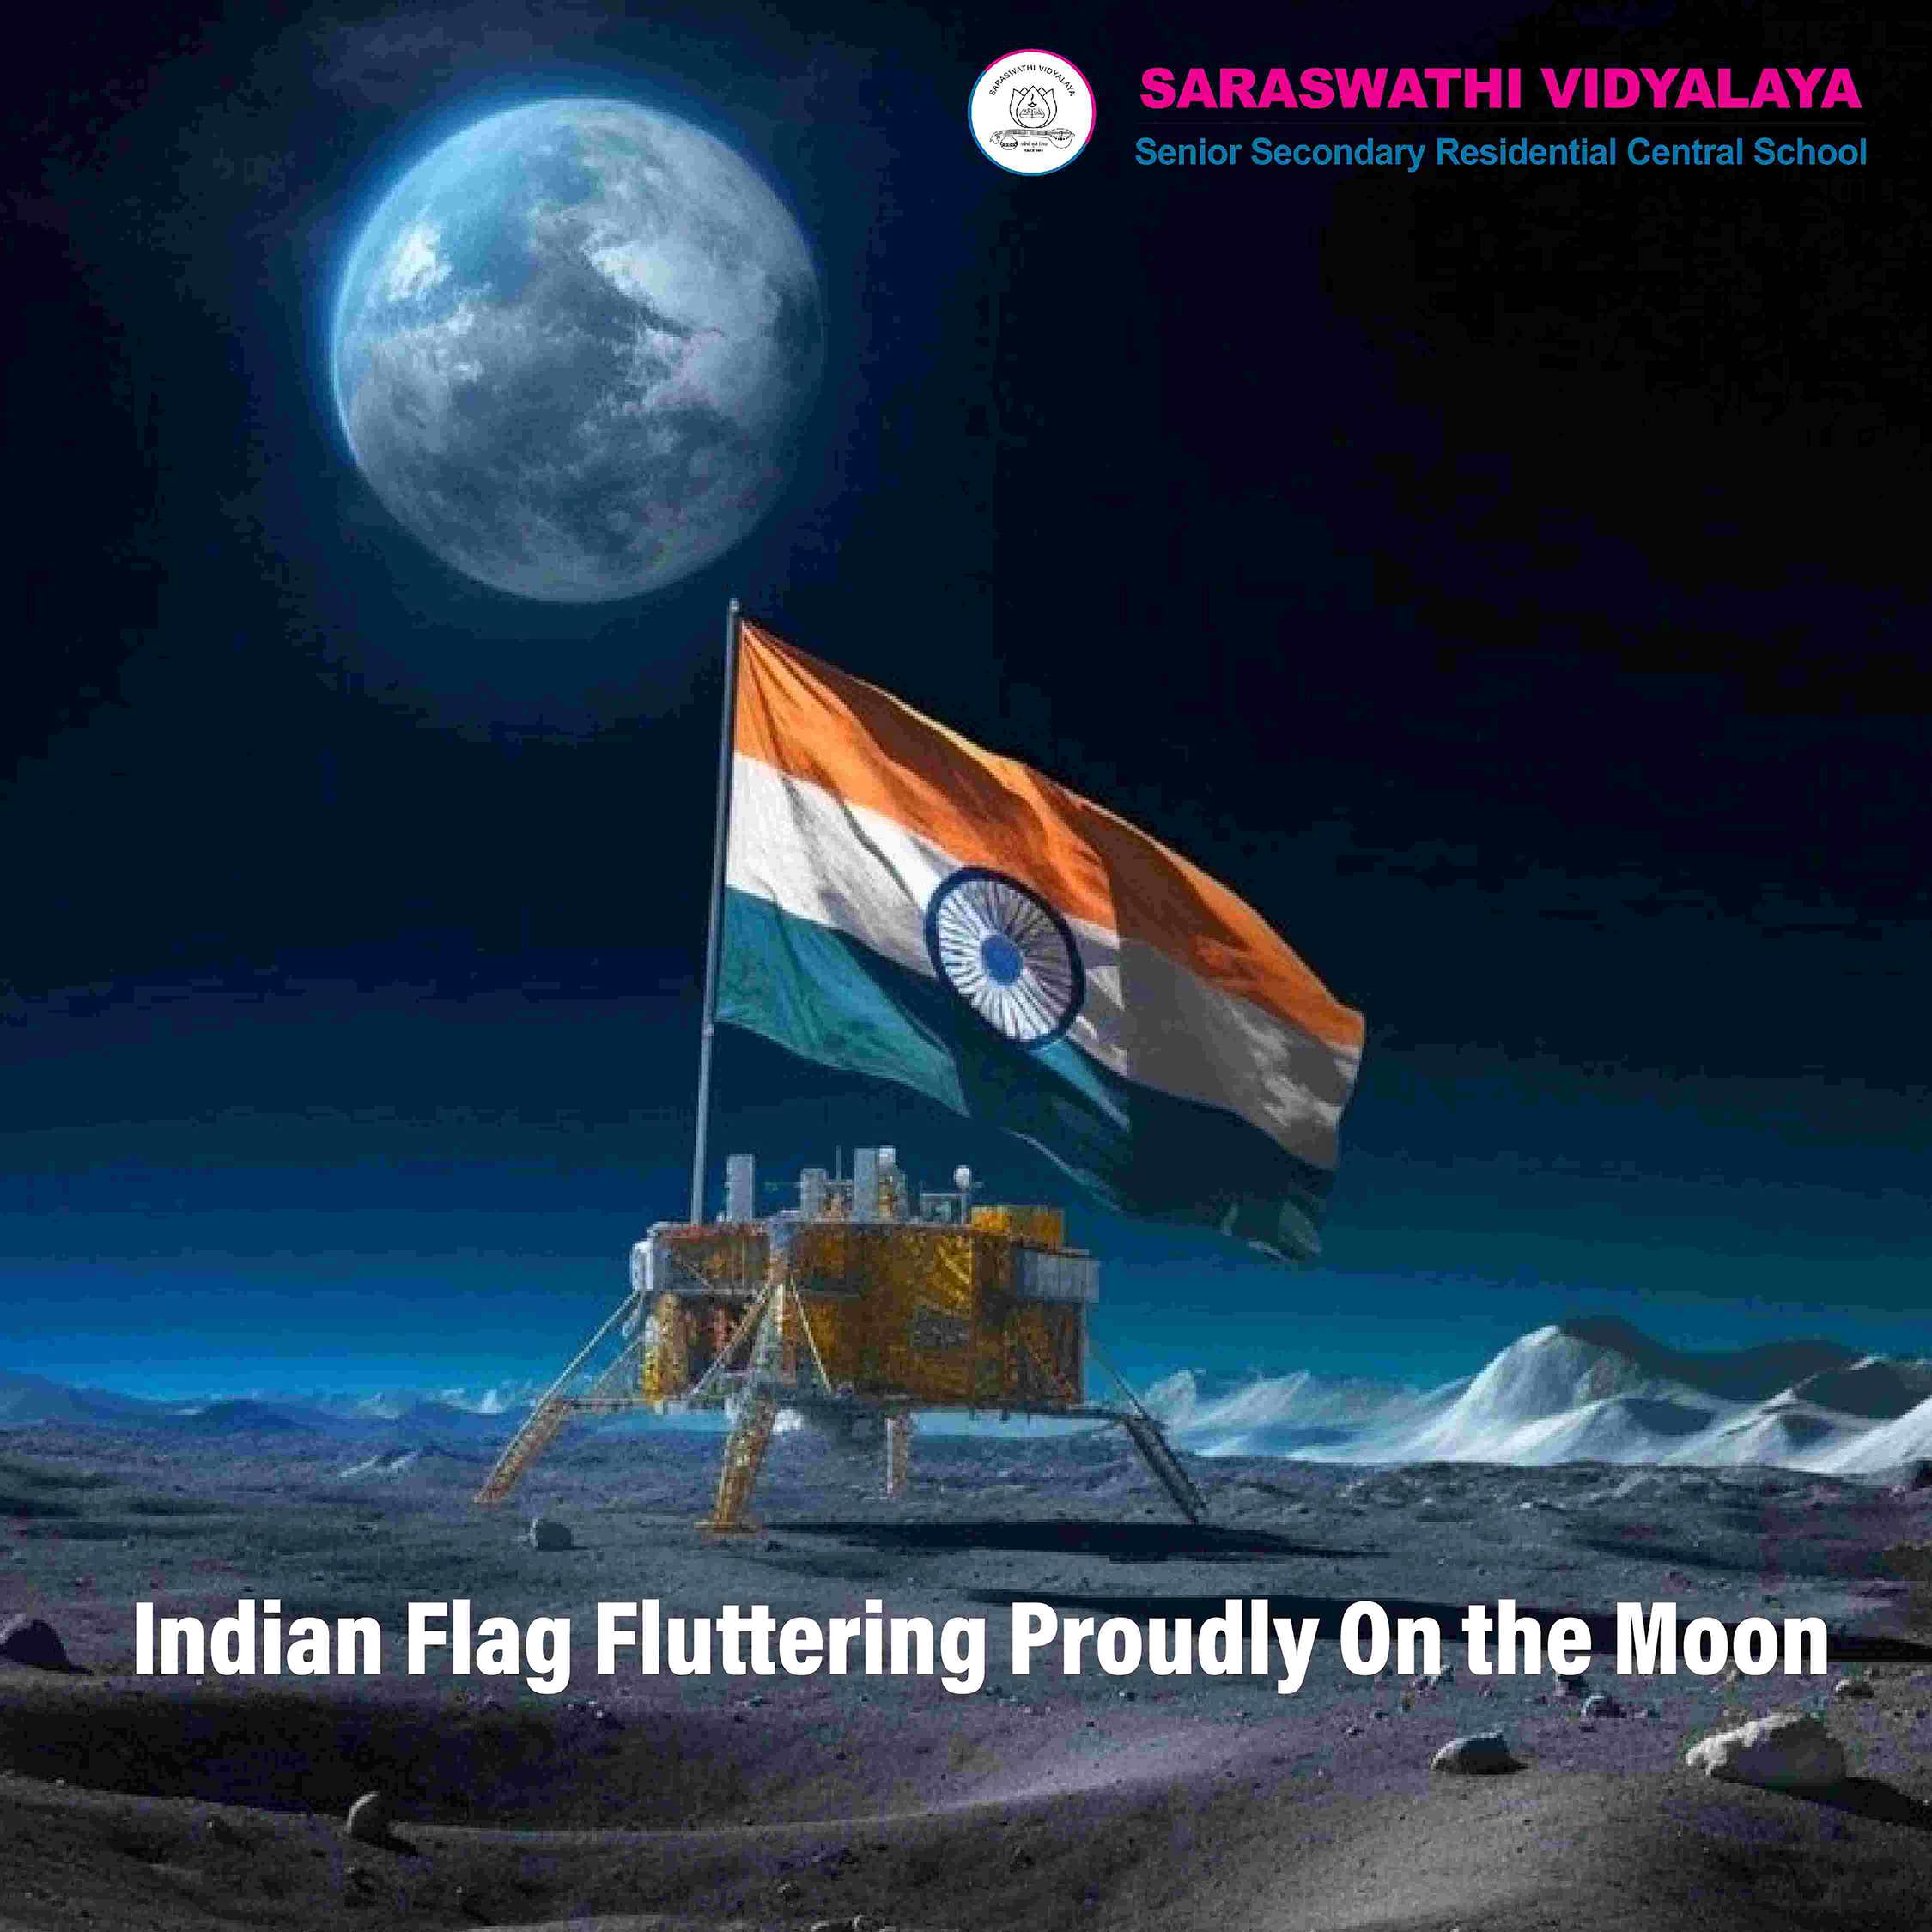 * Indian Flag Fluttering Proudly on the Moon *